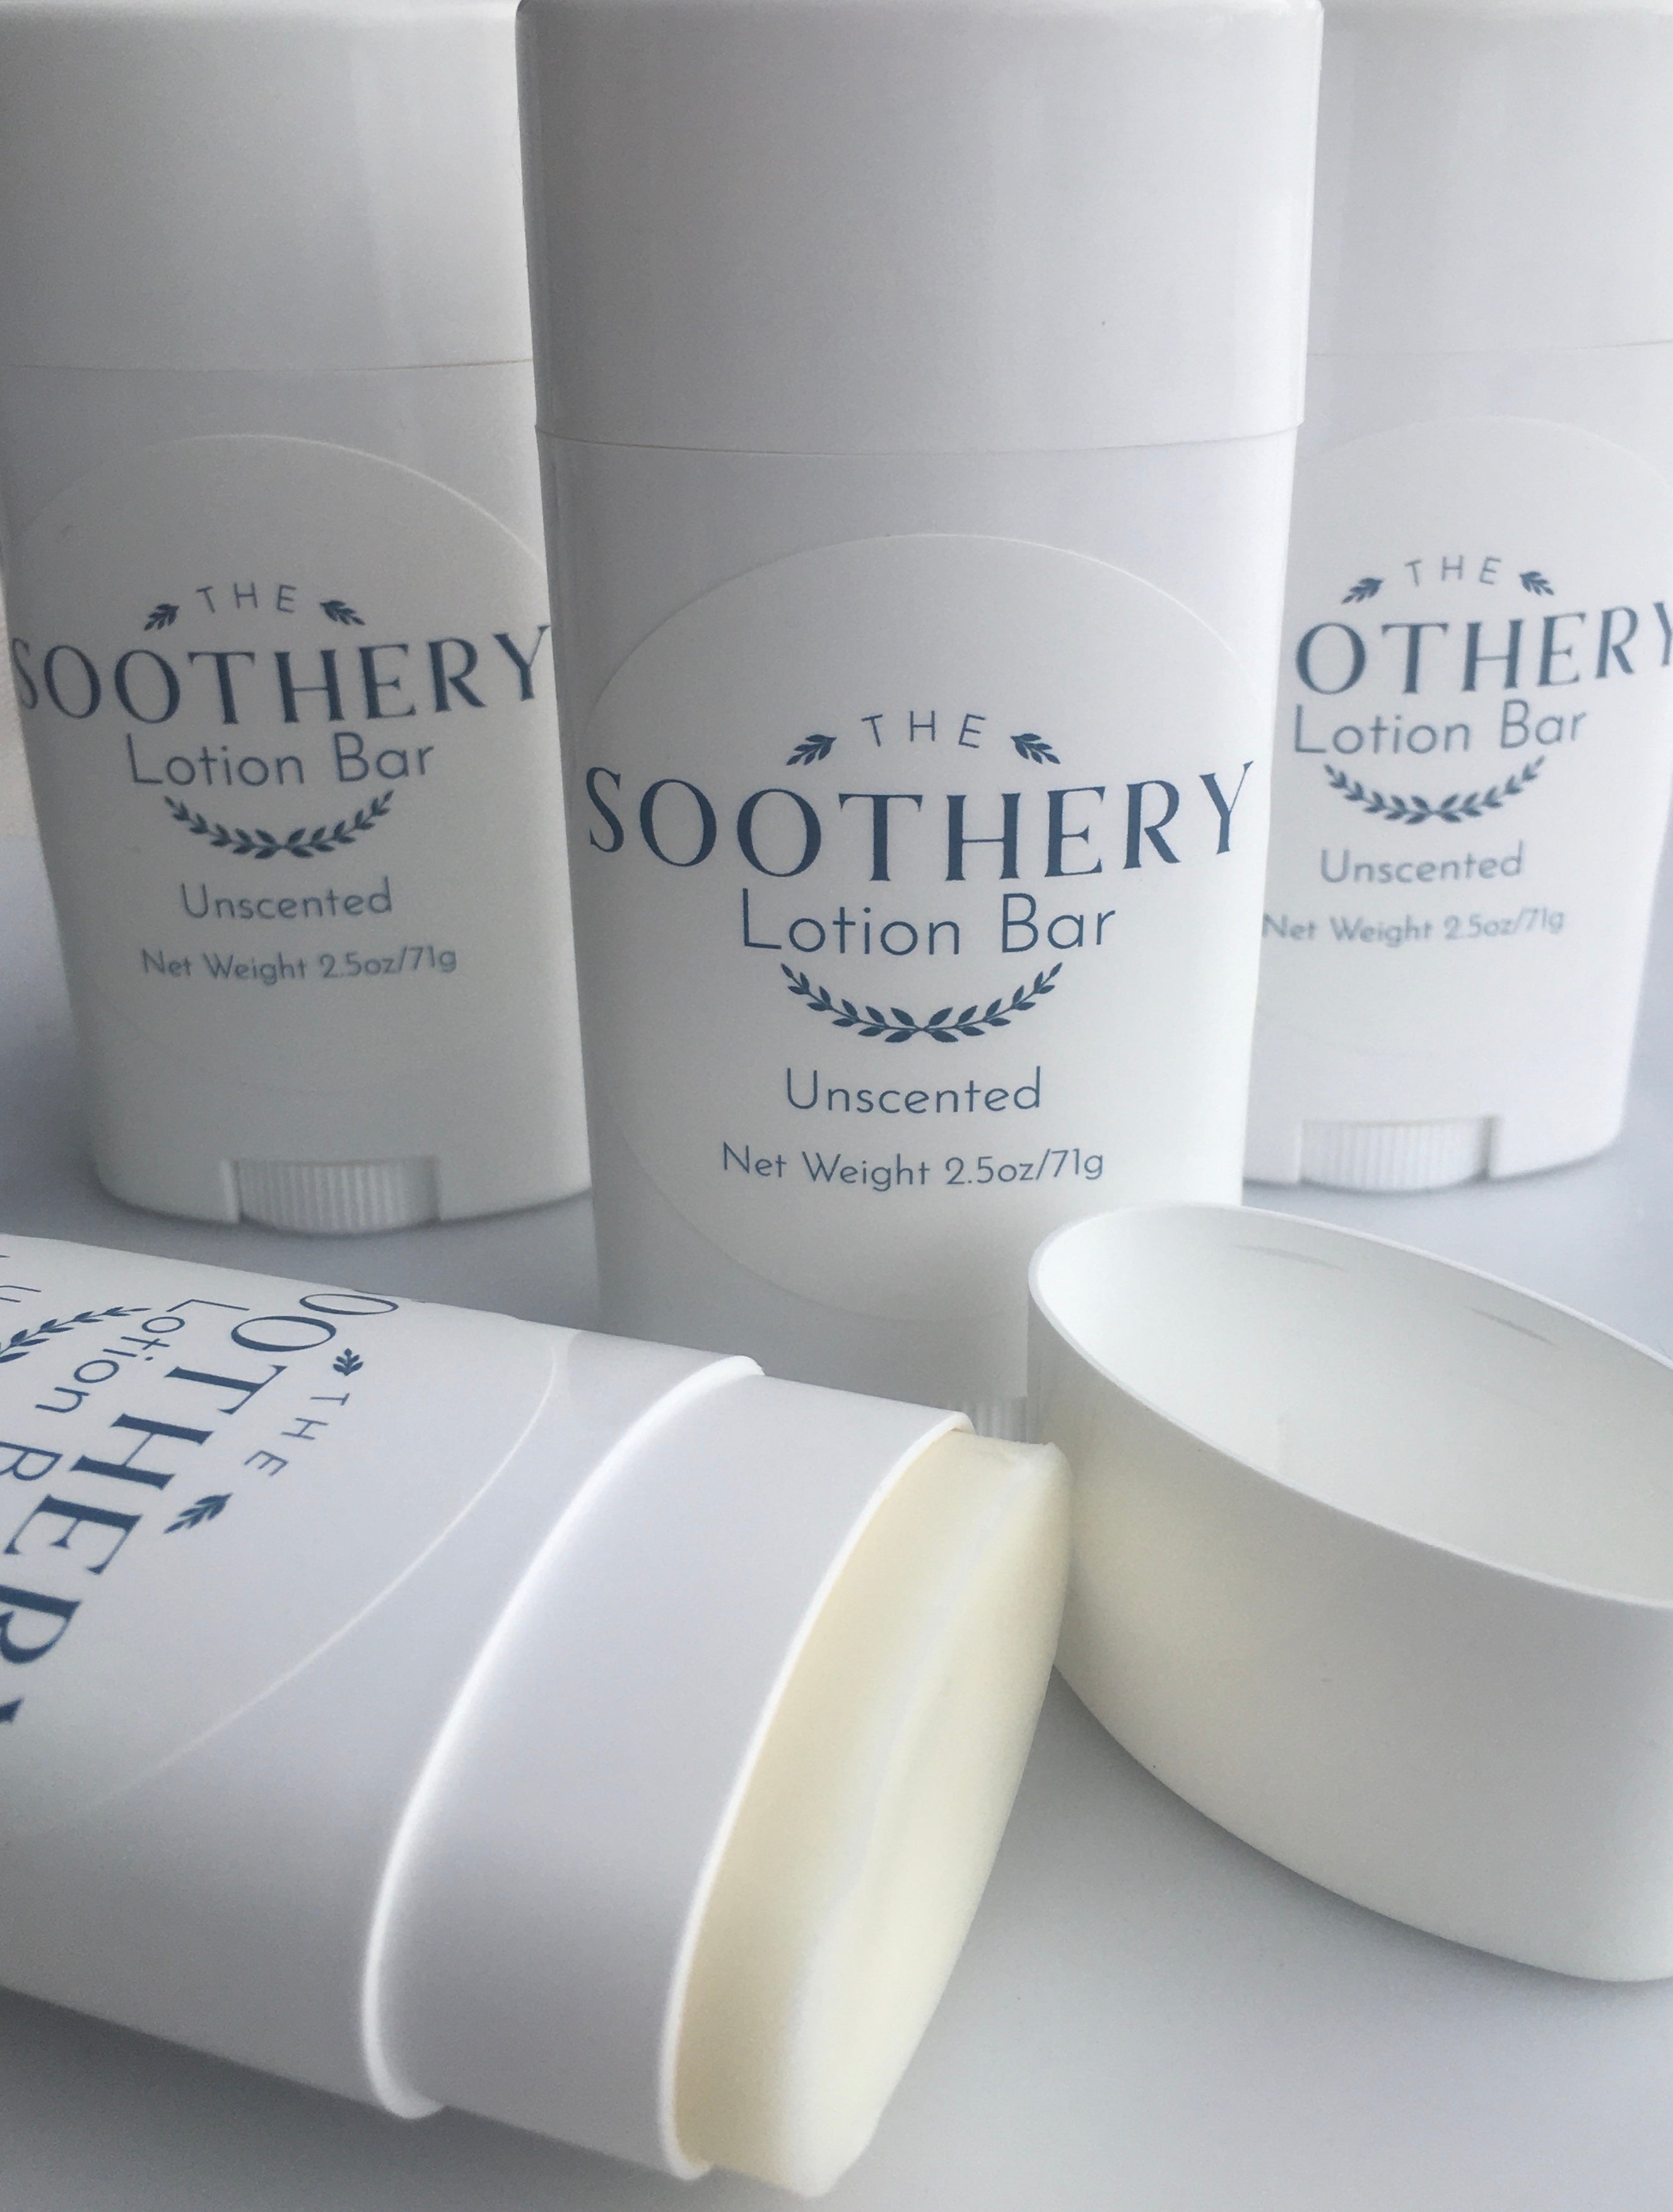 Unscented Lotion Bar – The Soothery